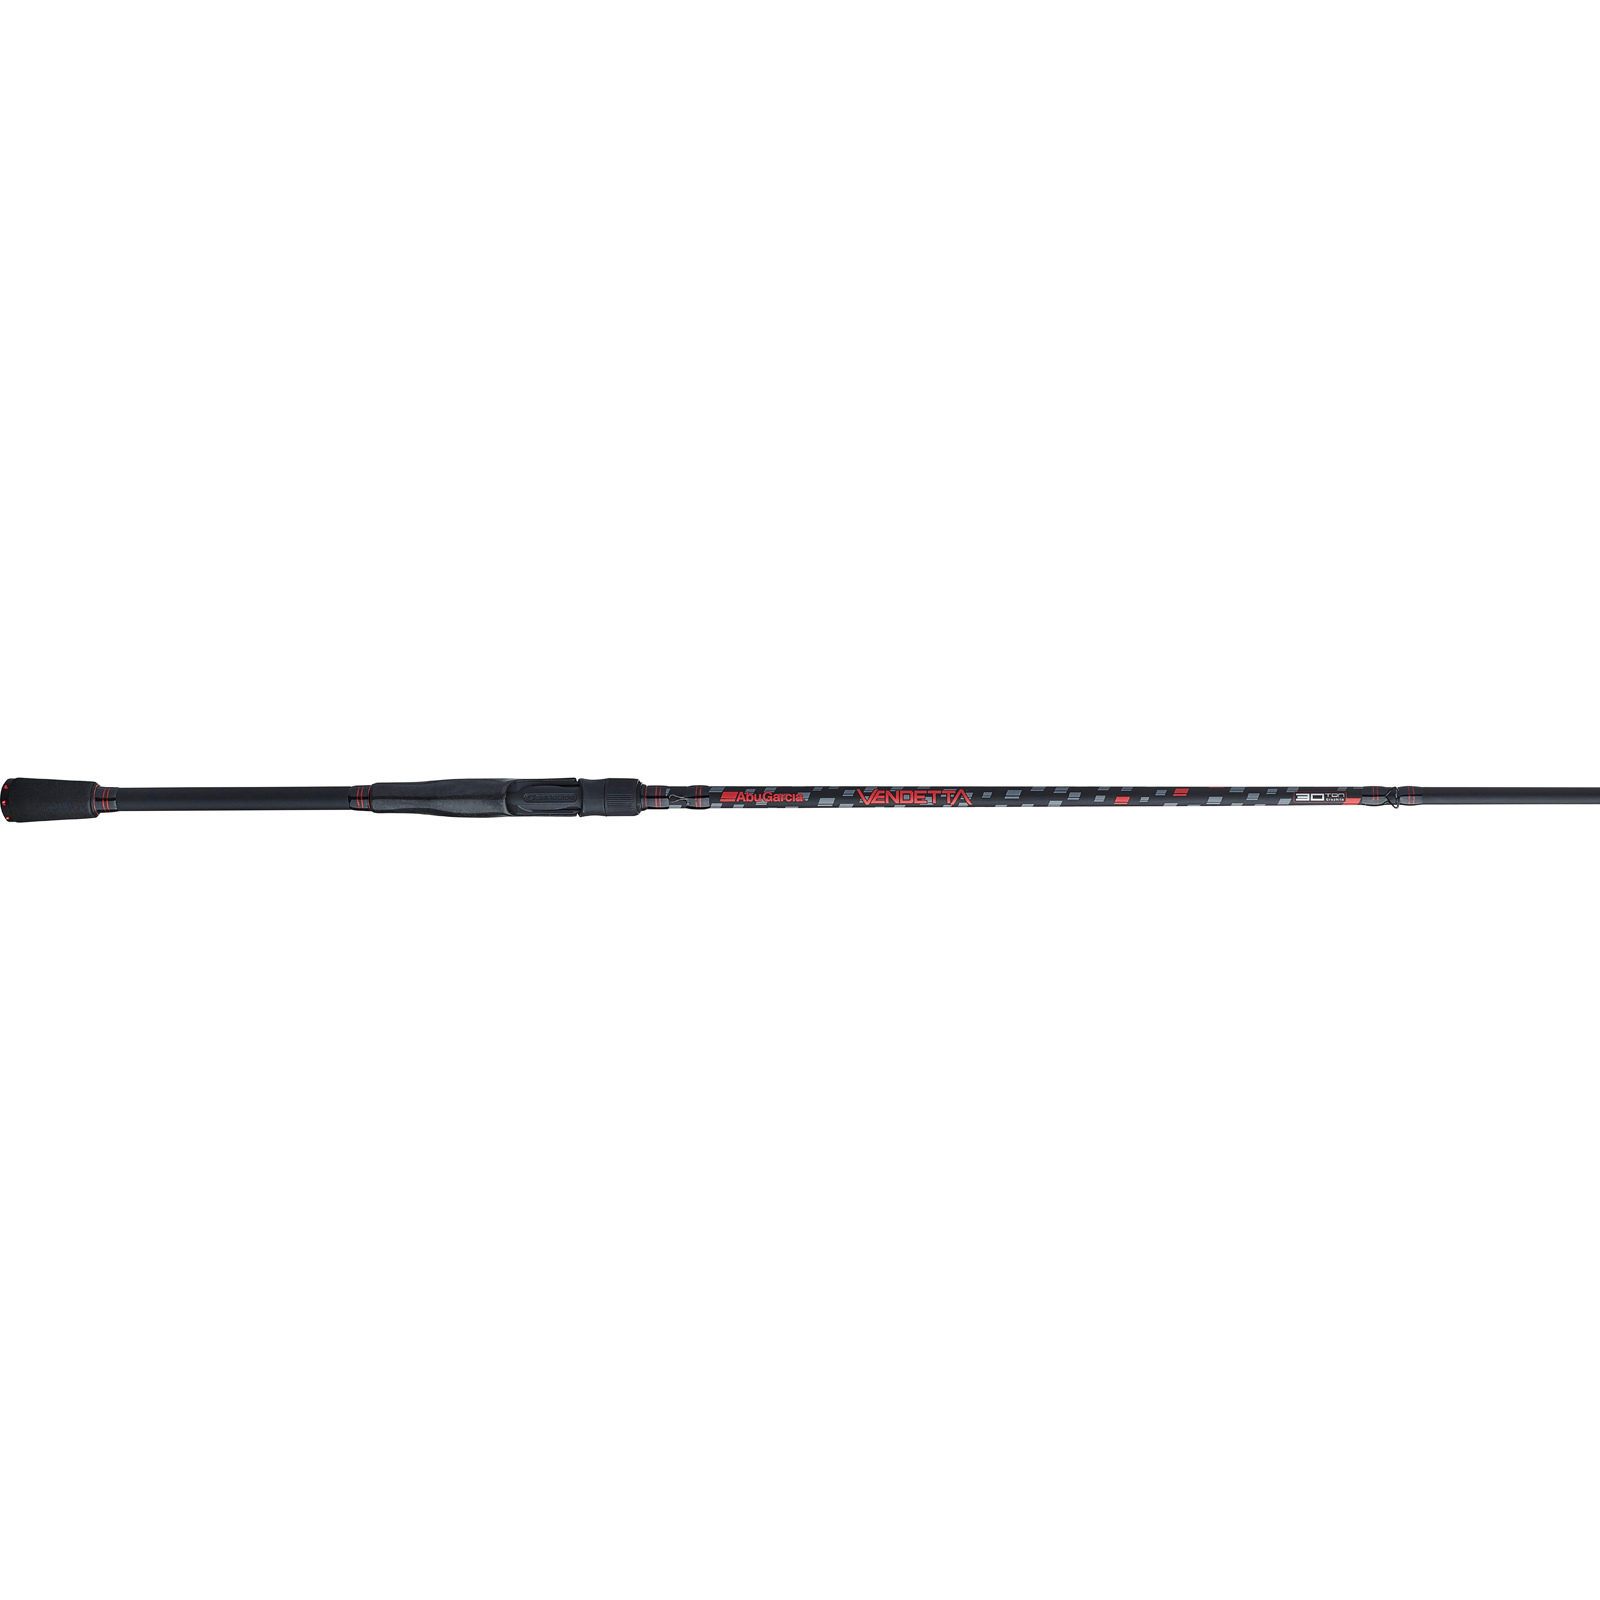 Abu Garcia Vendetta Casting Rod, 30 Ton Graphite with Intracarbon Blank,  Carbon Rear Grip, SS Guides with Zirconium Incerts, 2 Piece, Medium-Heavy  VDTIIC662-6 with Free S&H — CampSaver